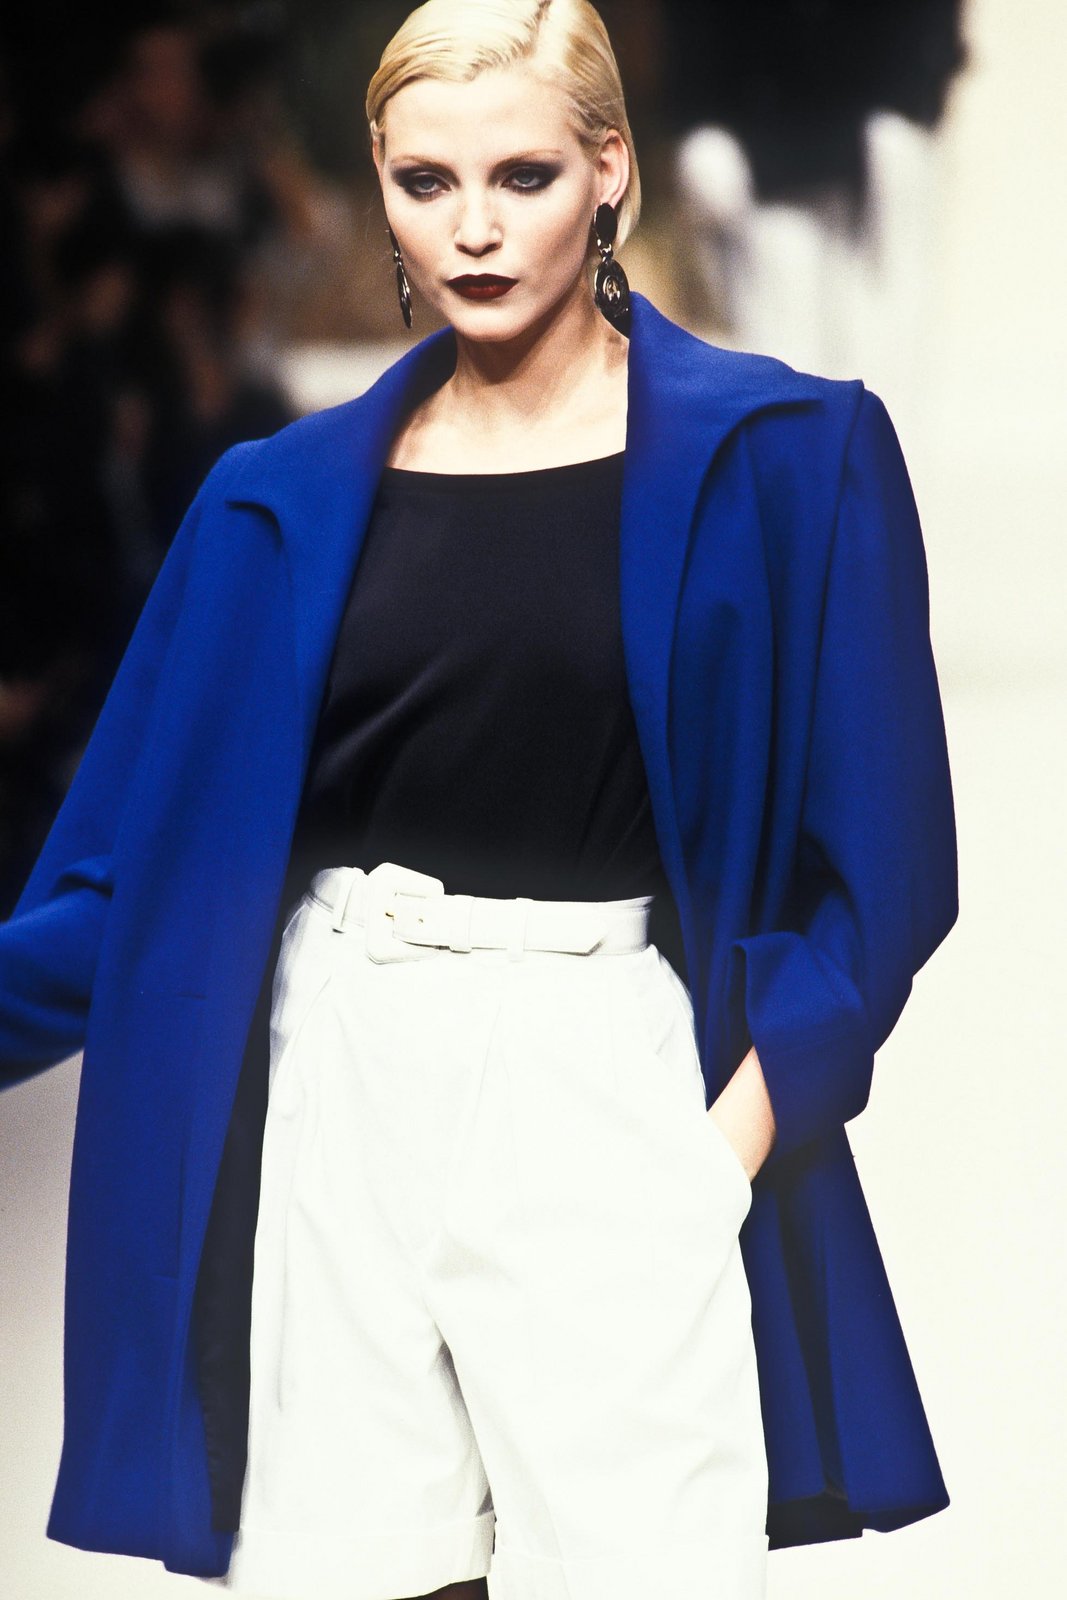 Fashion Classic: Yves Saint Laurent Spring/Summer 1995 | Page 2 ...